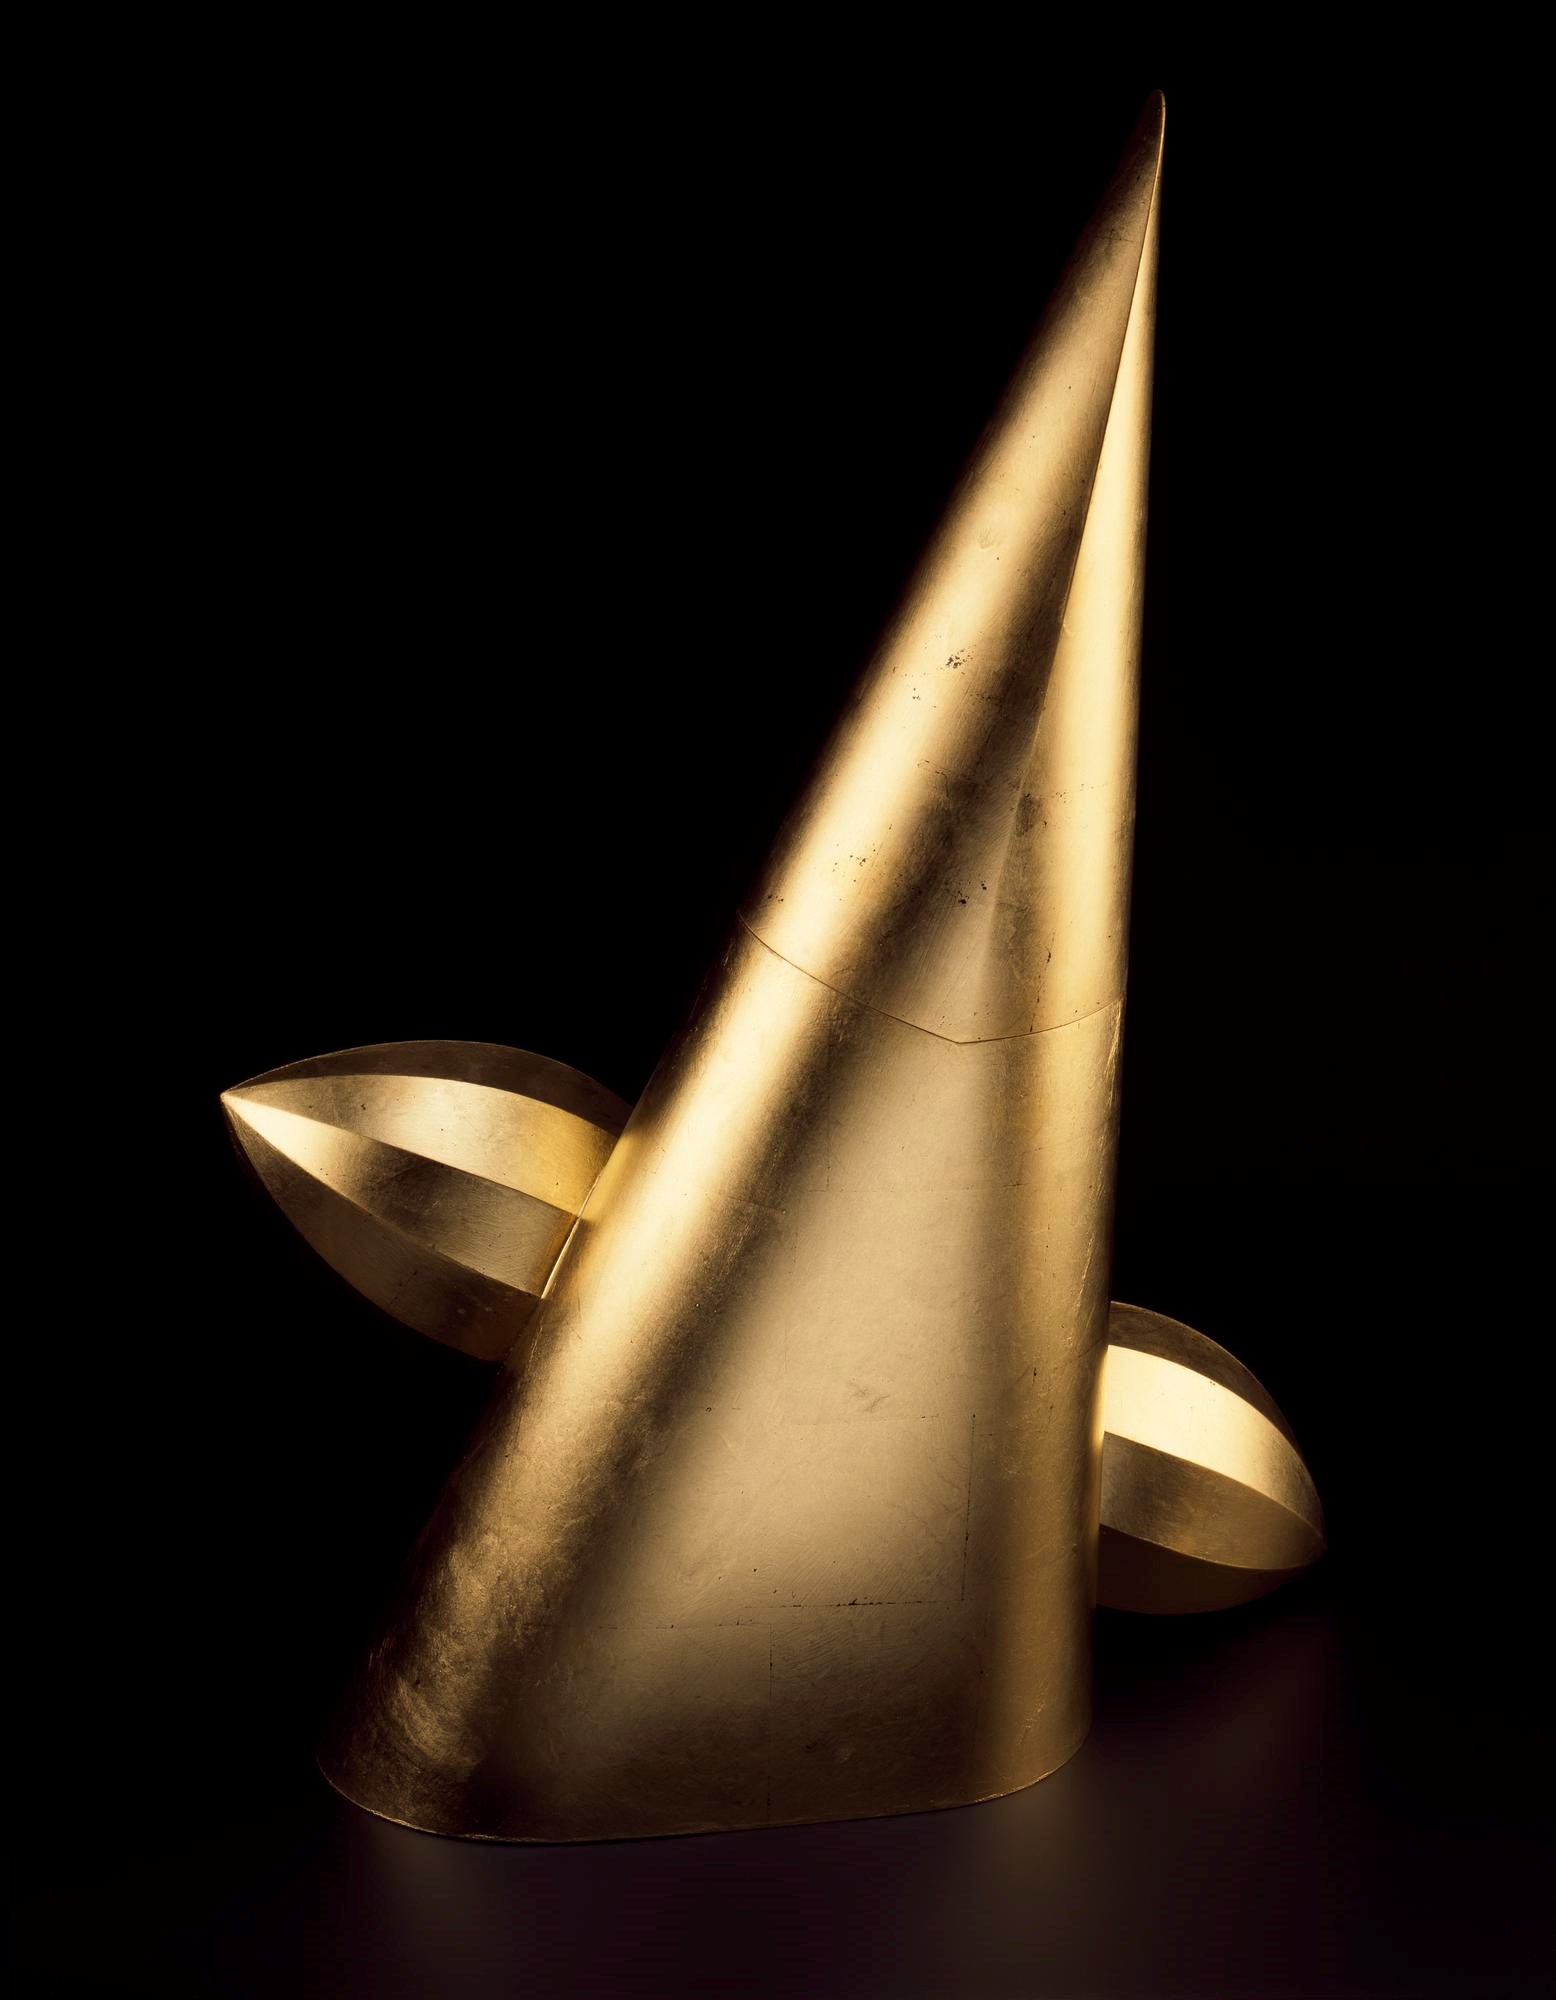 Metal sculpture, golden in colour. A tall triangle, becoming conical at the bottom and pointy on top, is pierced by a bullet-like pointed and flat-sided golden tube.